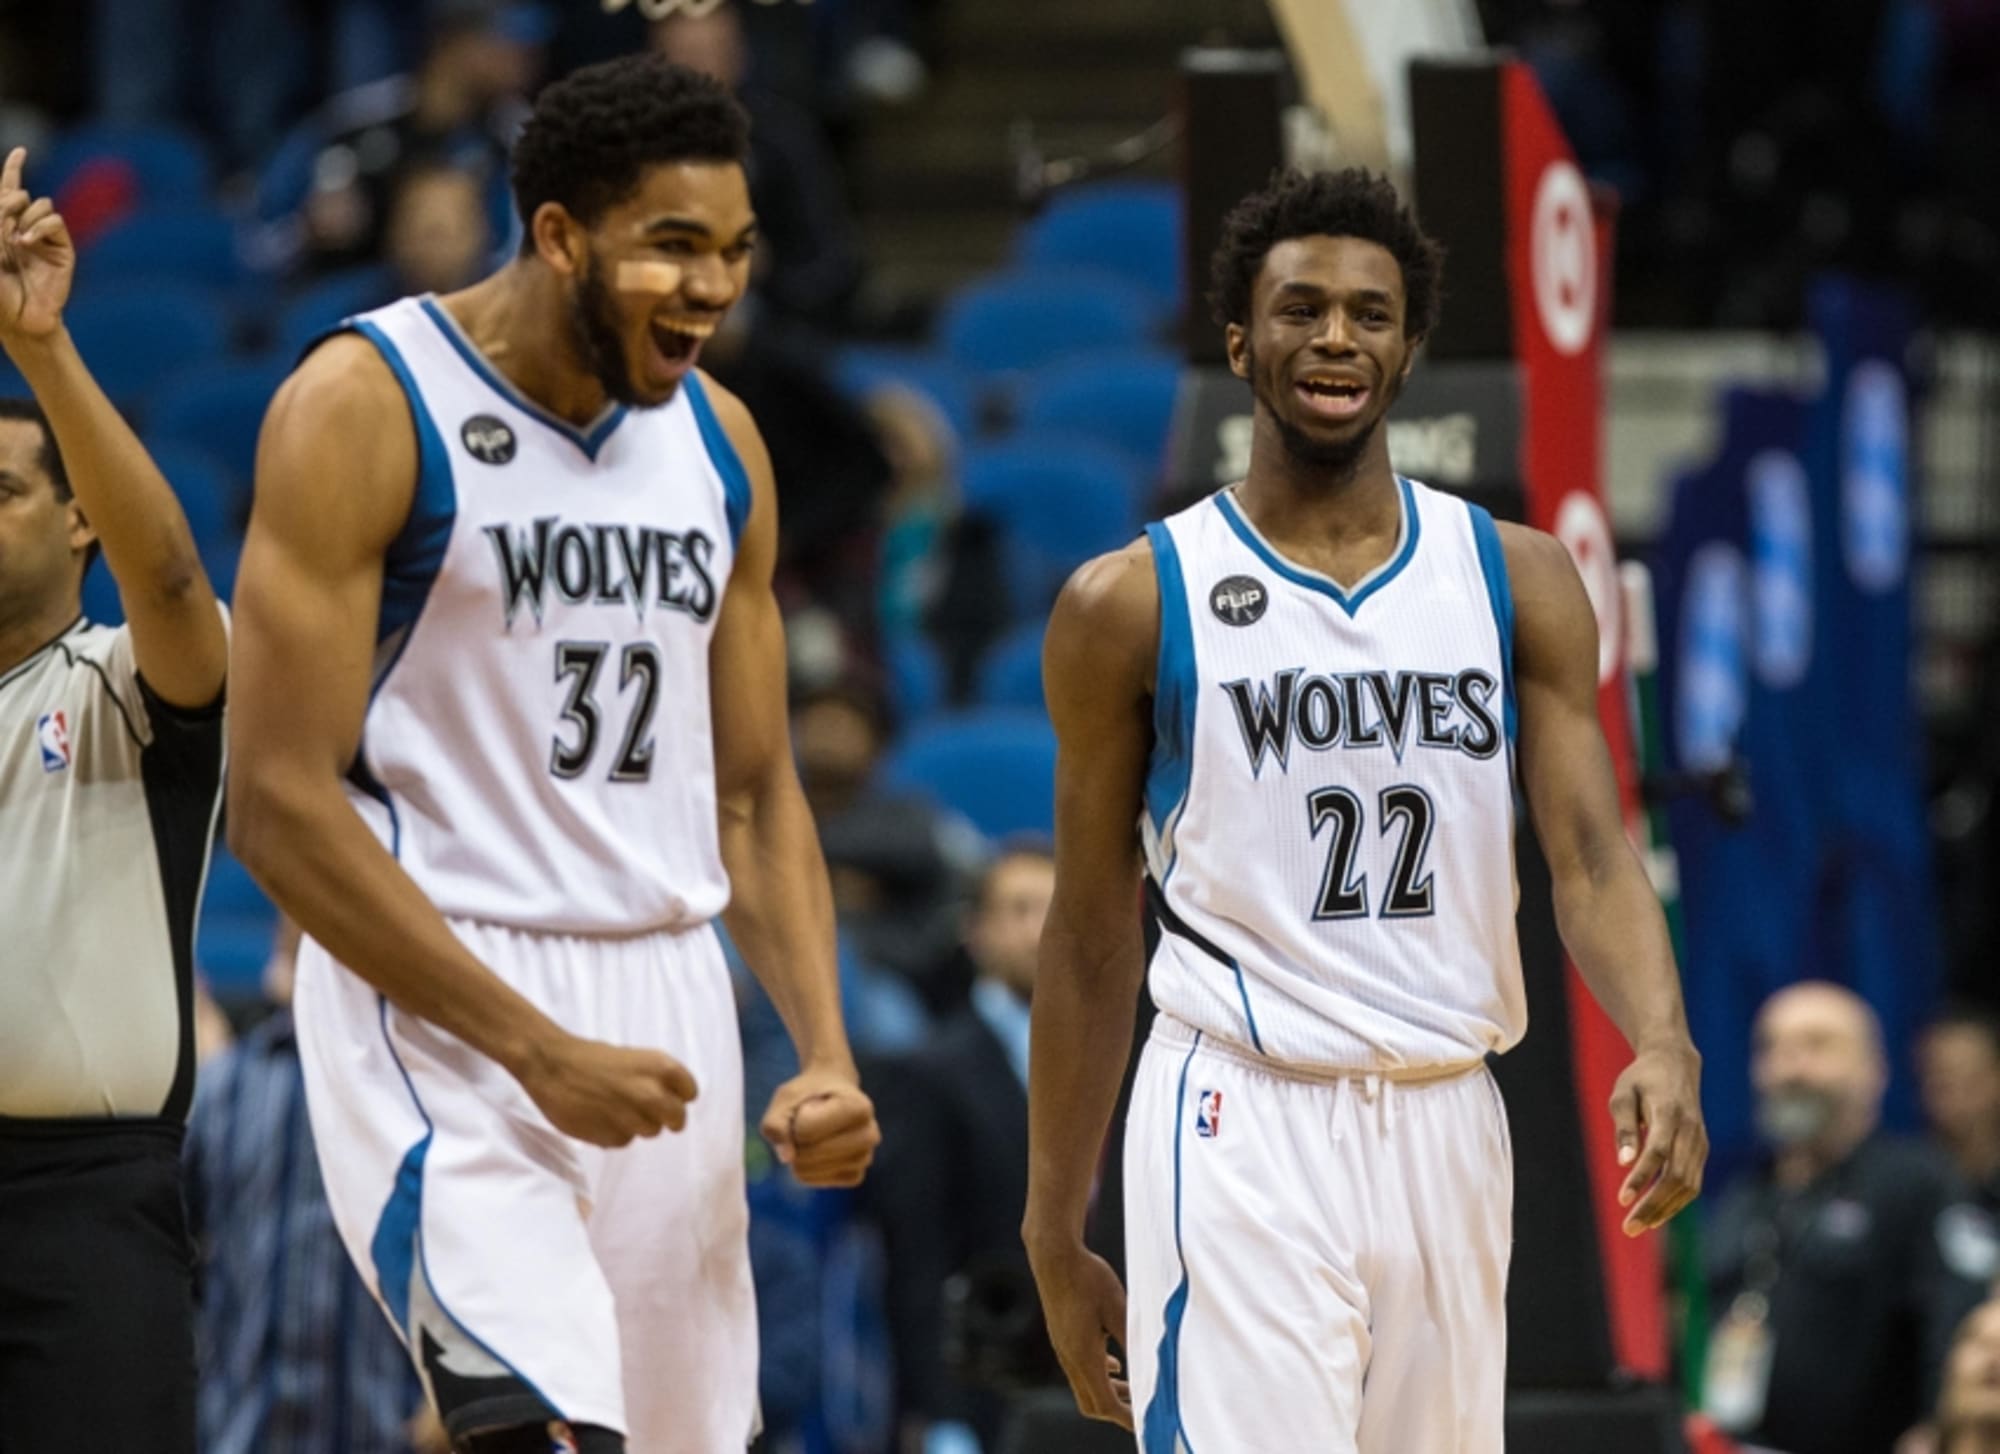 Should the Timberwolves trade Andrew Wiggins?